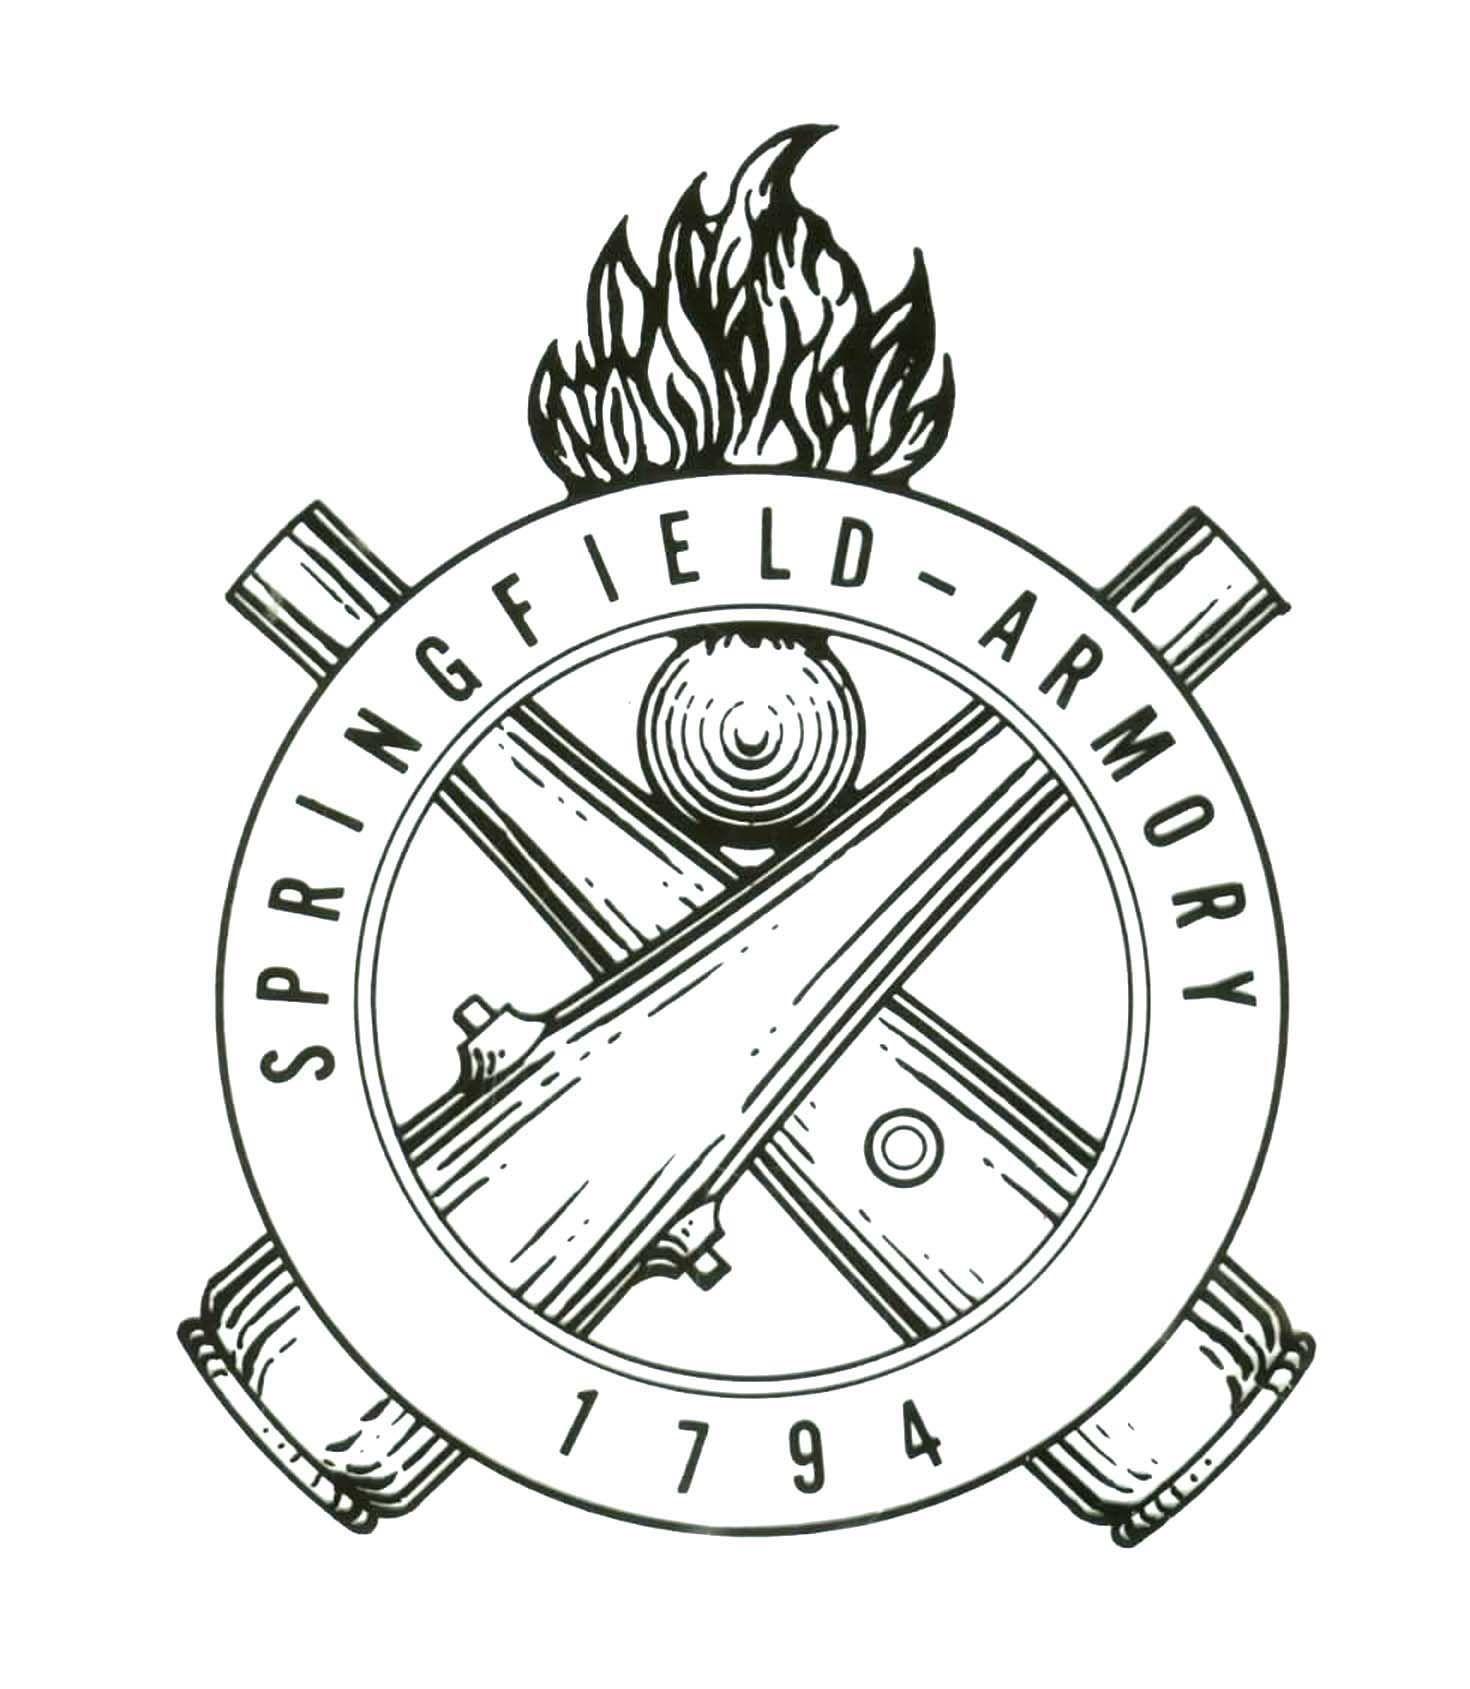 Springfield Armory Logo - Birth of a Museum - Springfield Armory National Historic Site (U.S. ...